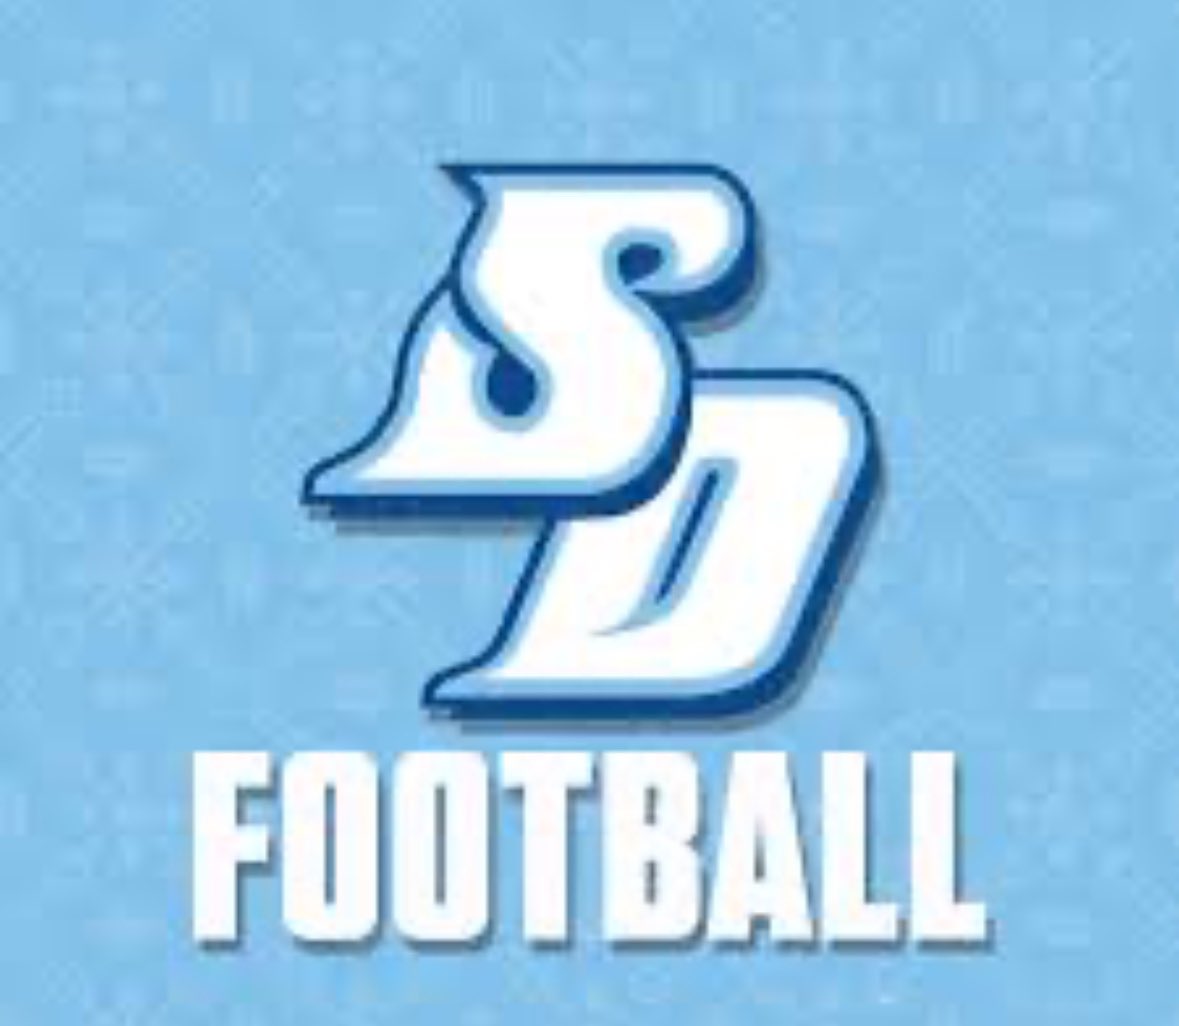 After talking with @CoachRocket73 I’m excited to receive an offer from @USDFootball ! @Daygofootball @SDFBRecruits @granitehillsfb @SDPrepInsider @CoachVinnieDC @SDFNLMagazine